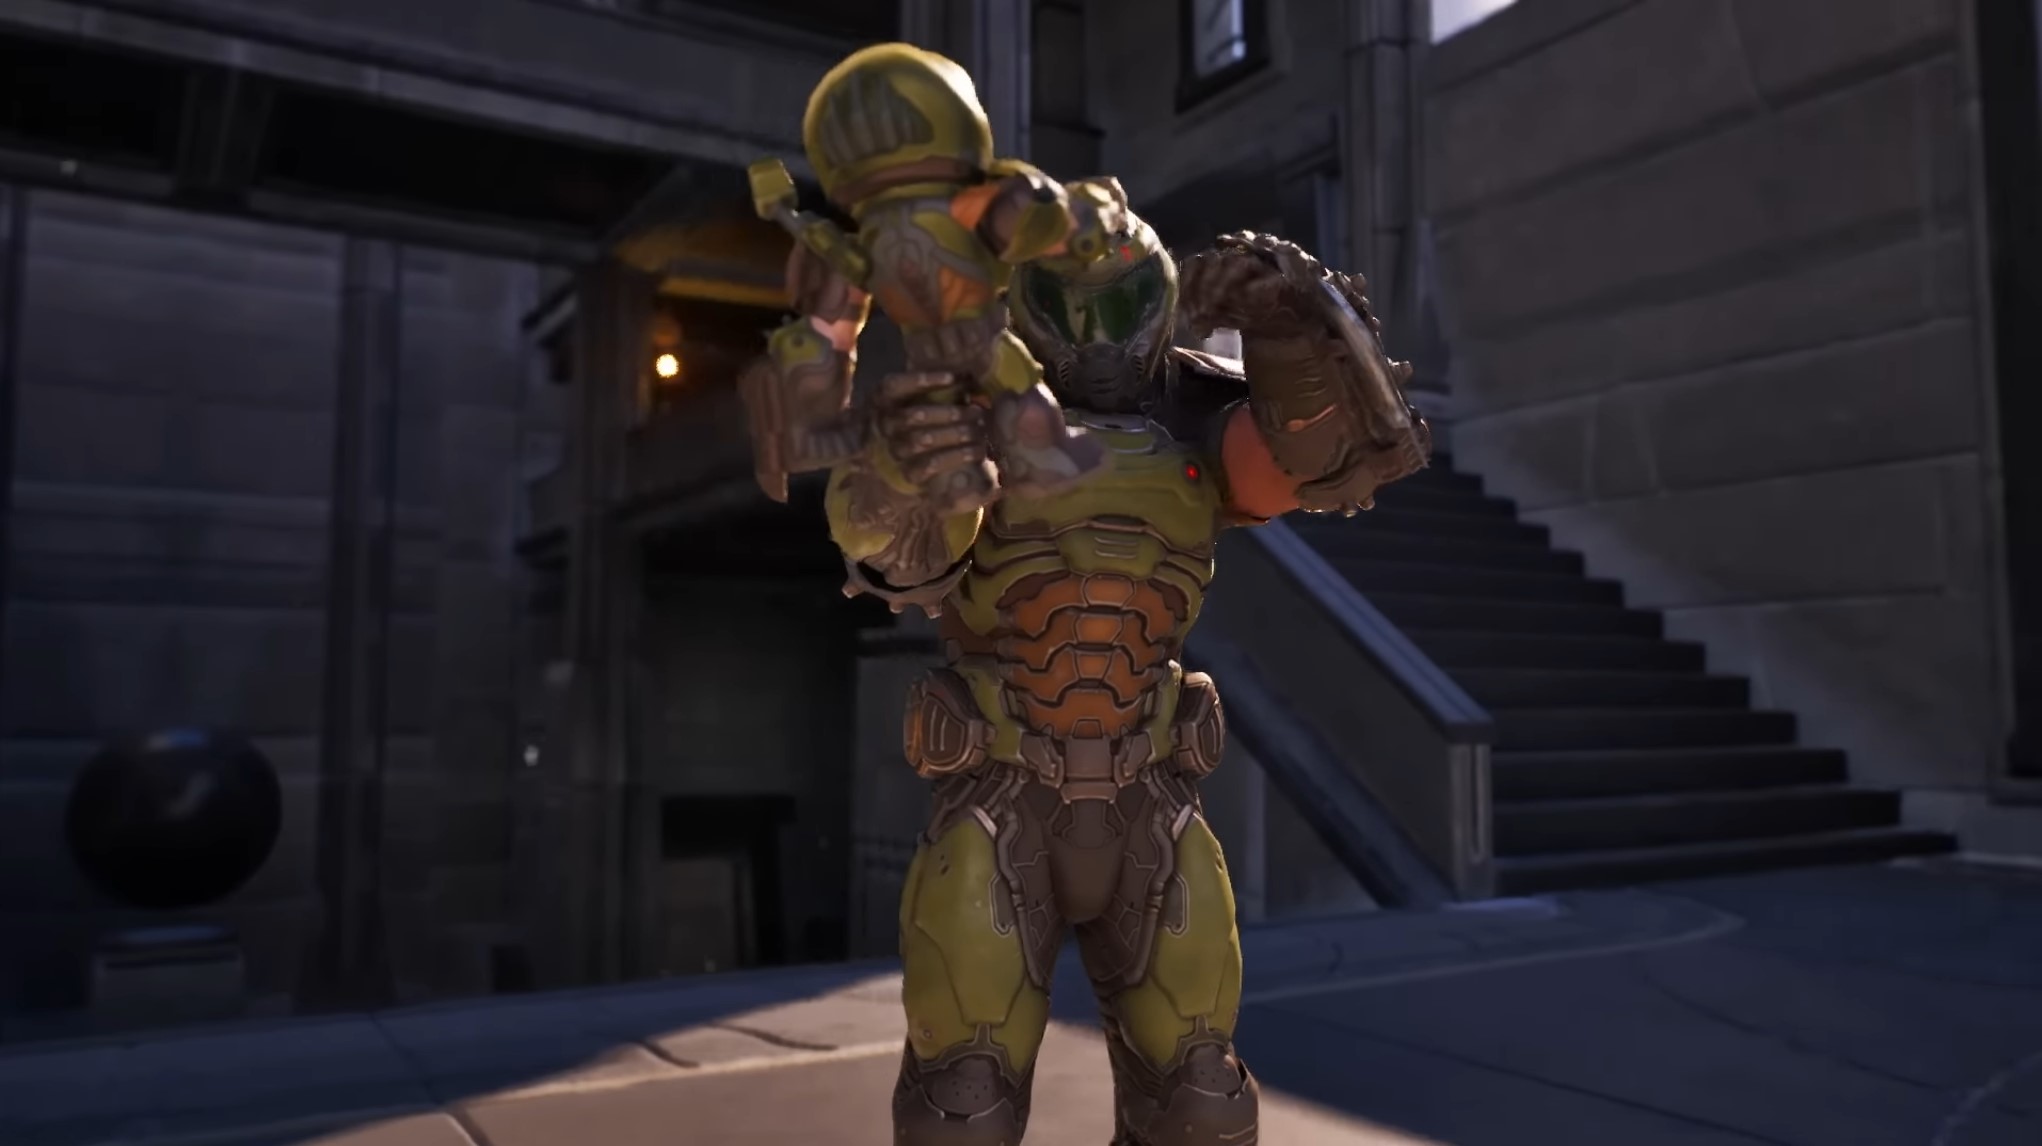 Doom slayer fist bumps his little toy friend in Fortnite